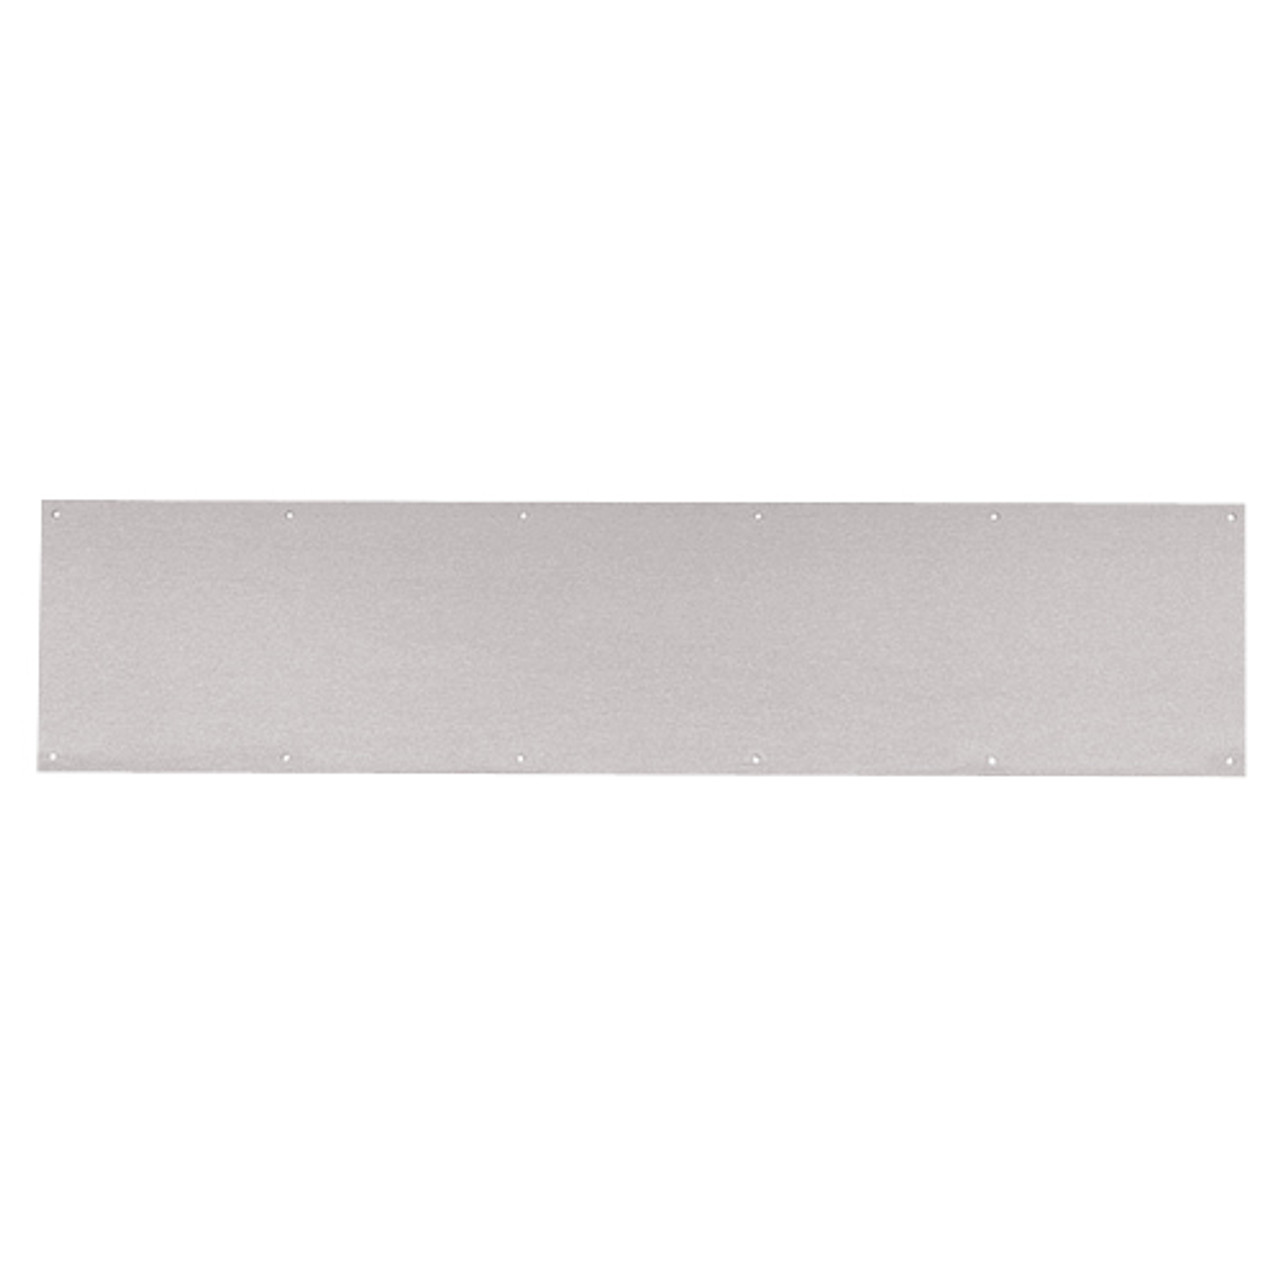 8400-US32D-40x35-B-CS Ives 8400 Series Protection Plate in Satin Stainless Steel